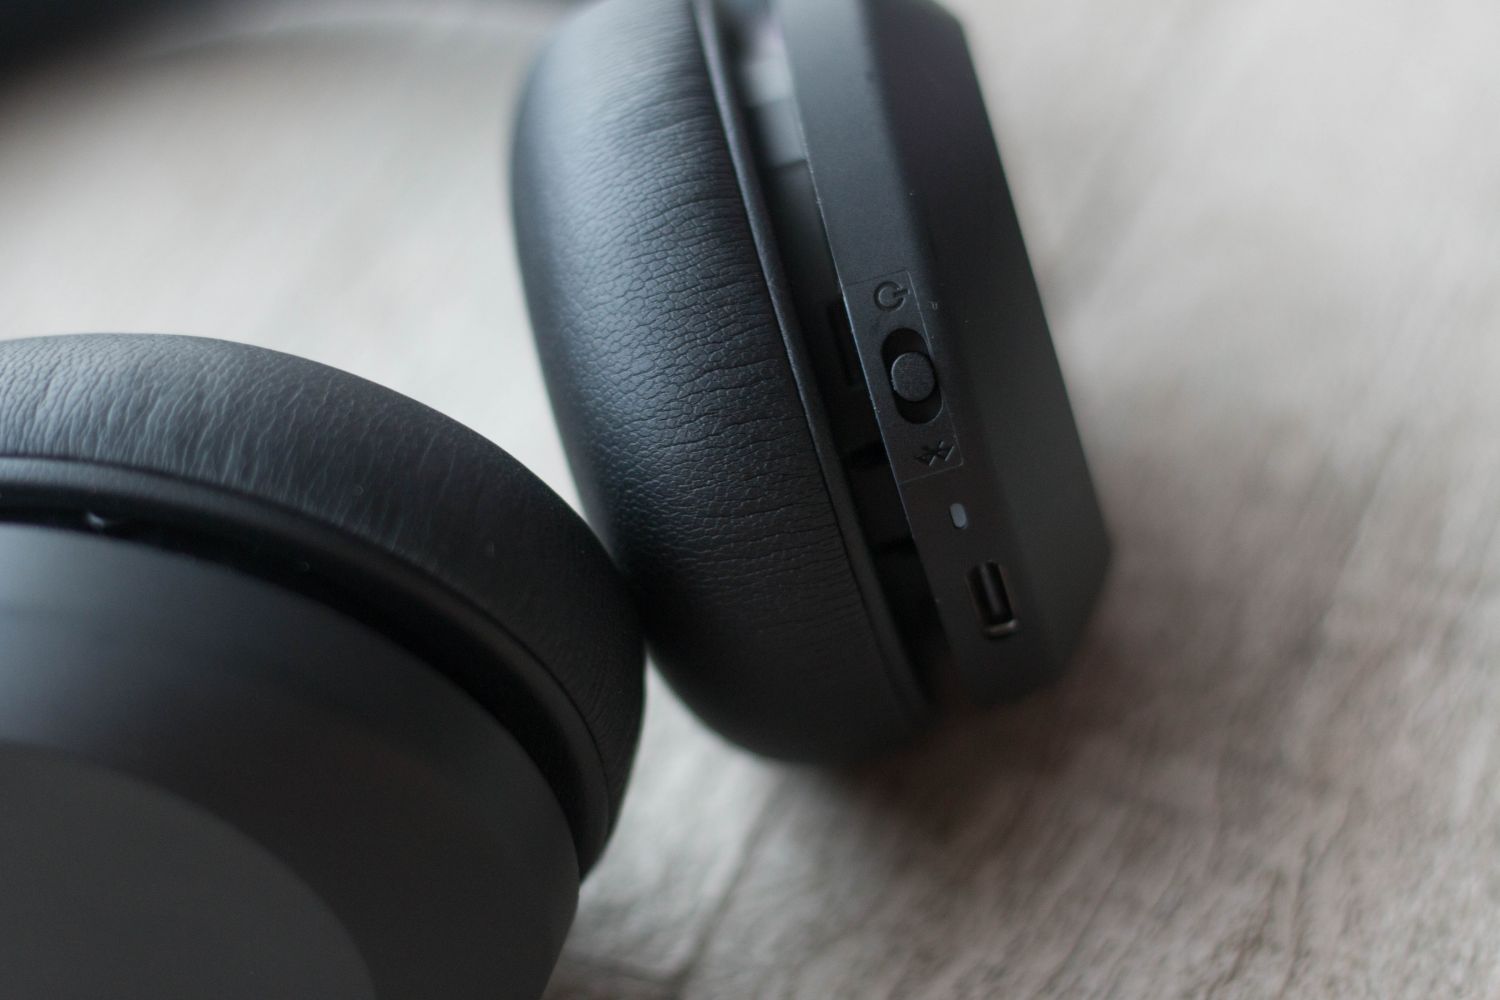 The Jabra Elite 45h can be your go-to headphones - GadgetMatch